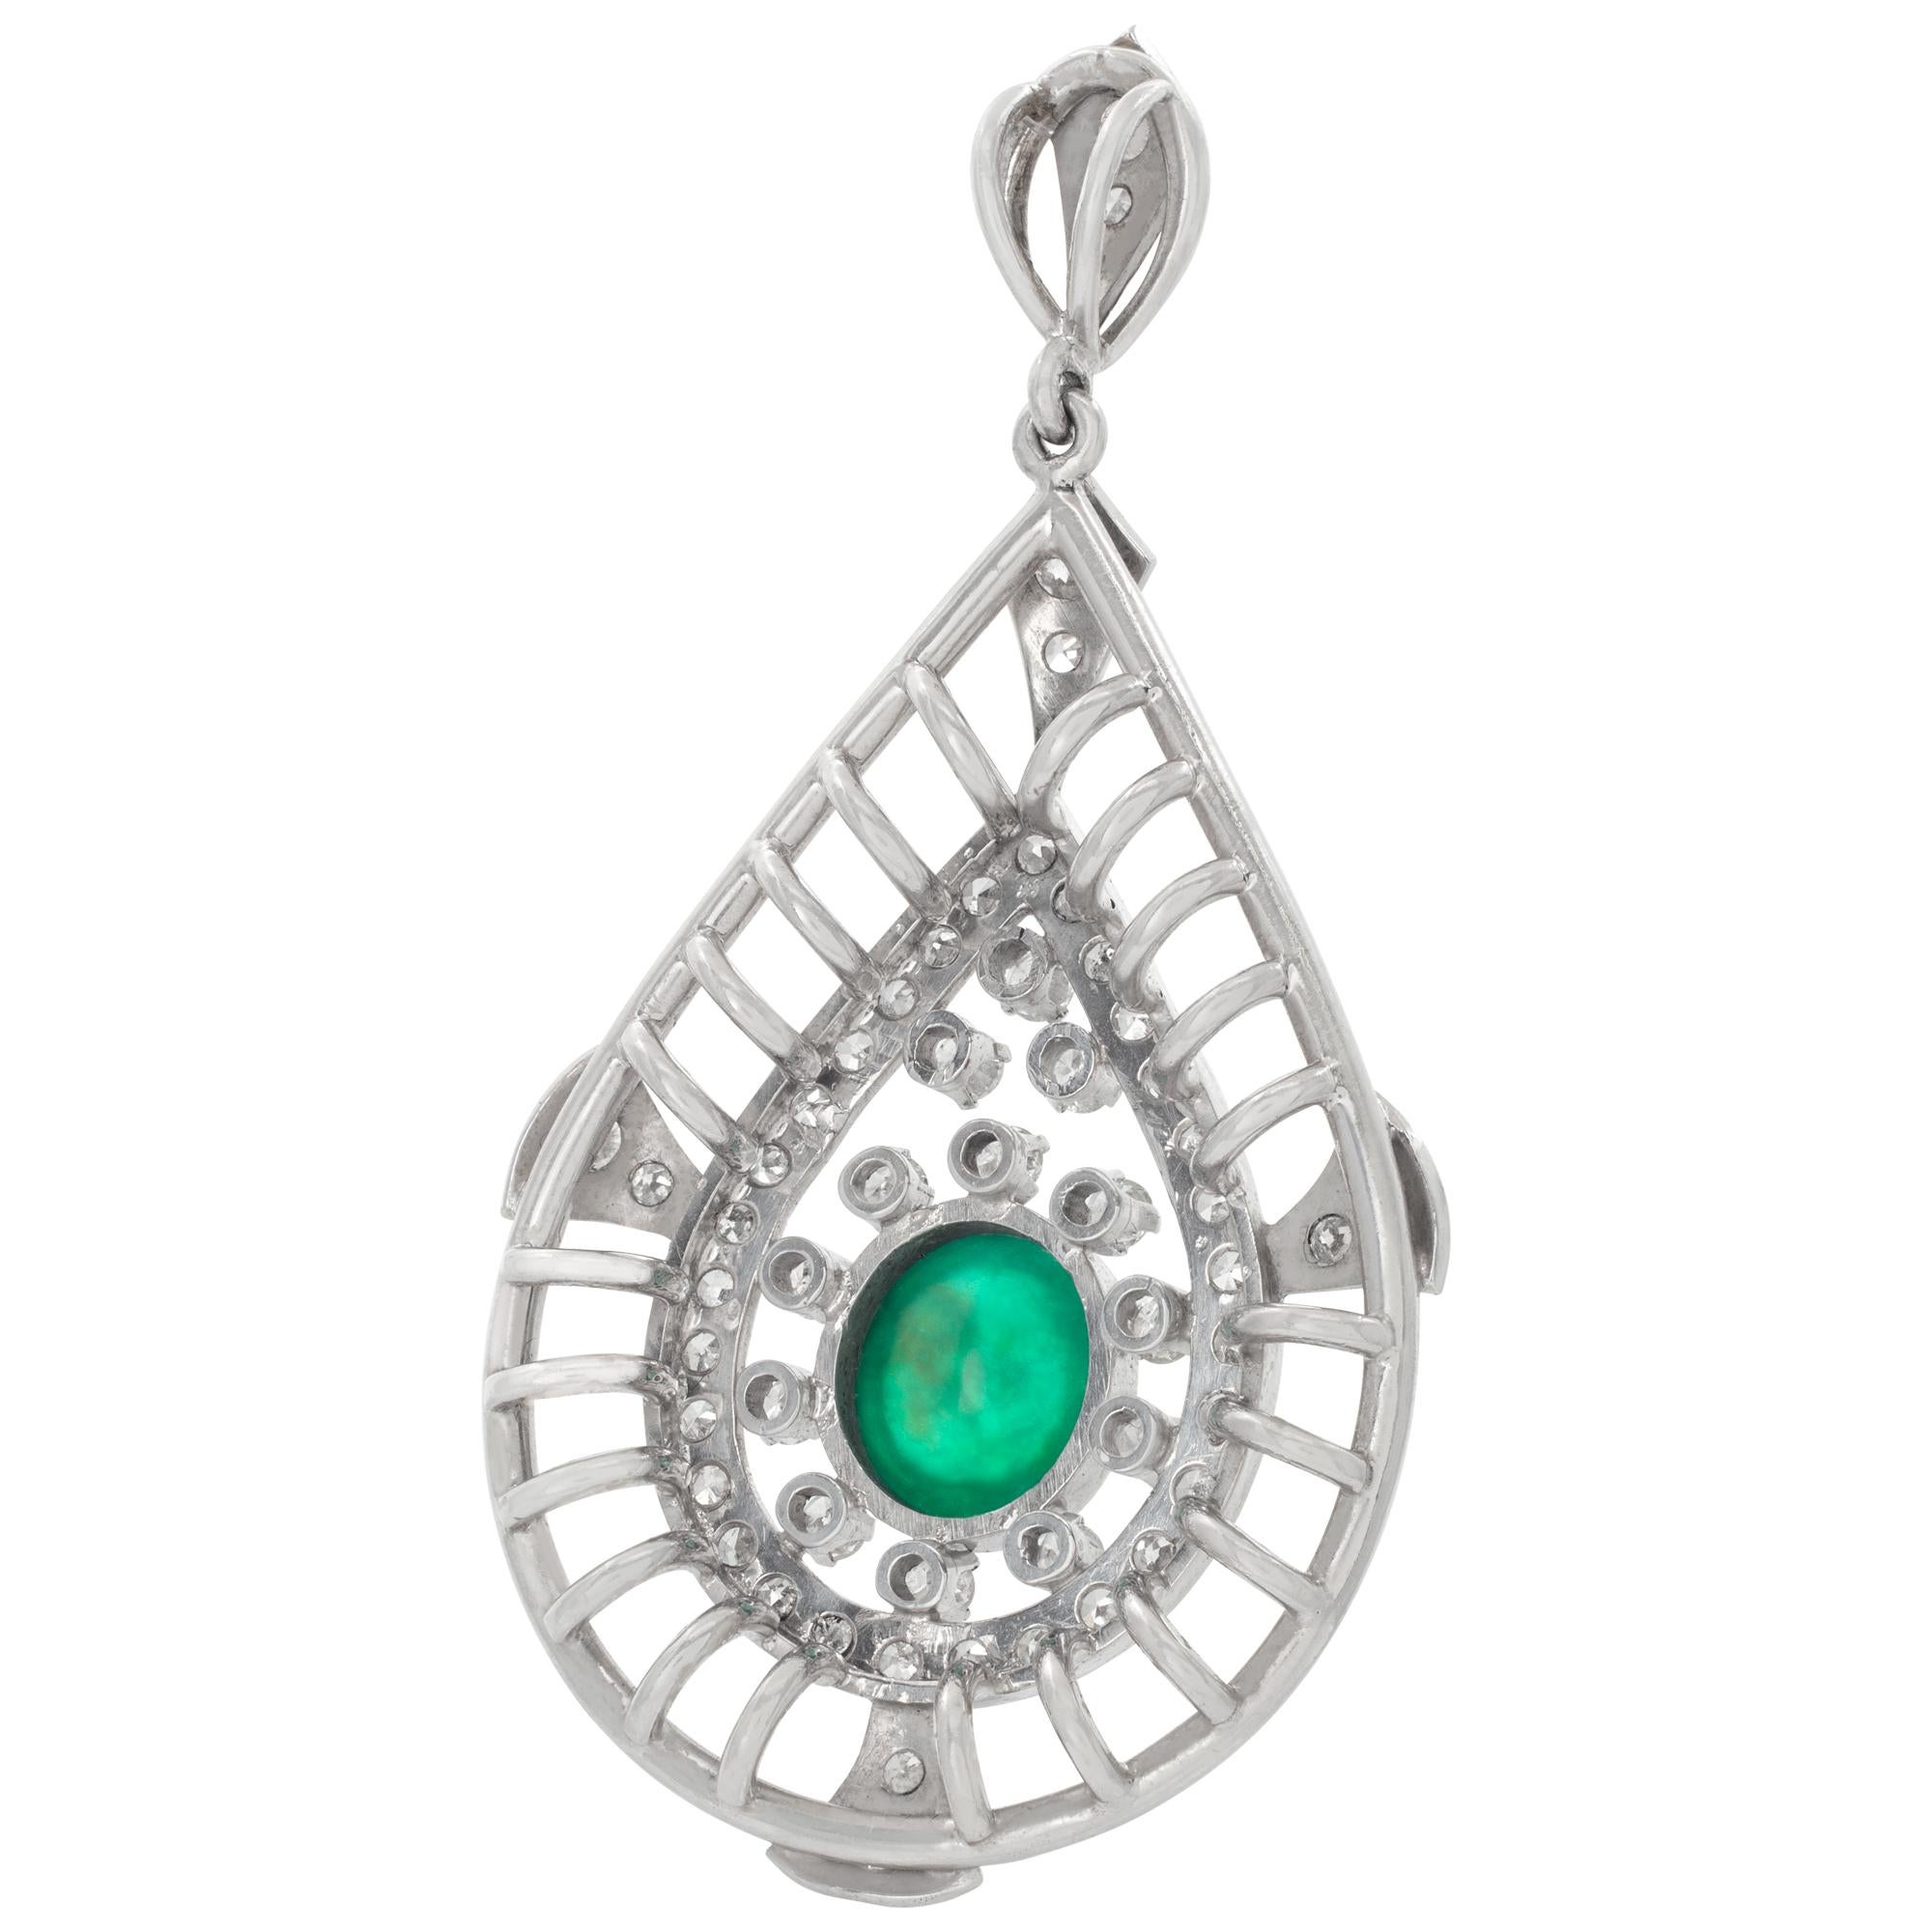 Women's or Men's White gold tear drop brooch with center cabochon emerald and accent diamonds For Sale